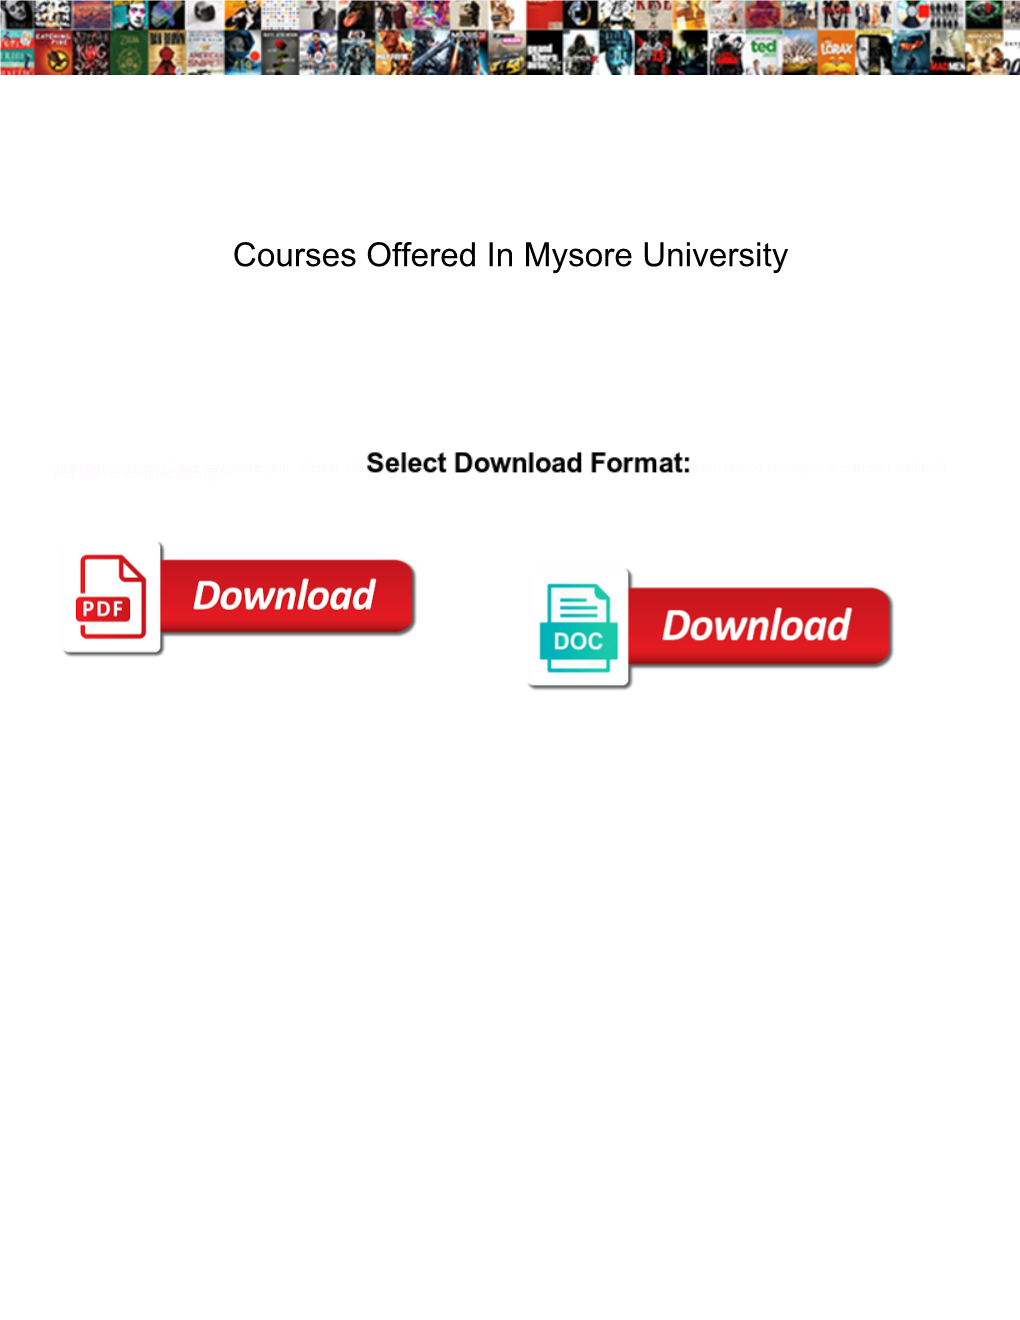 Courses Offered in Mysore University